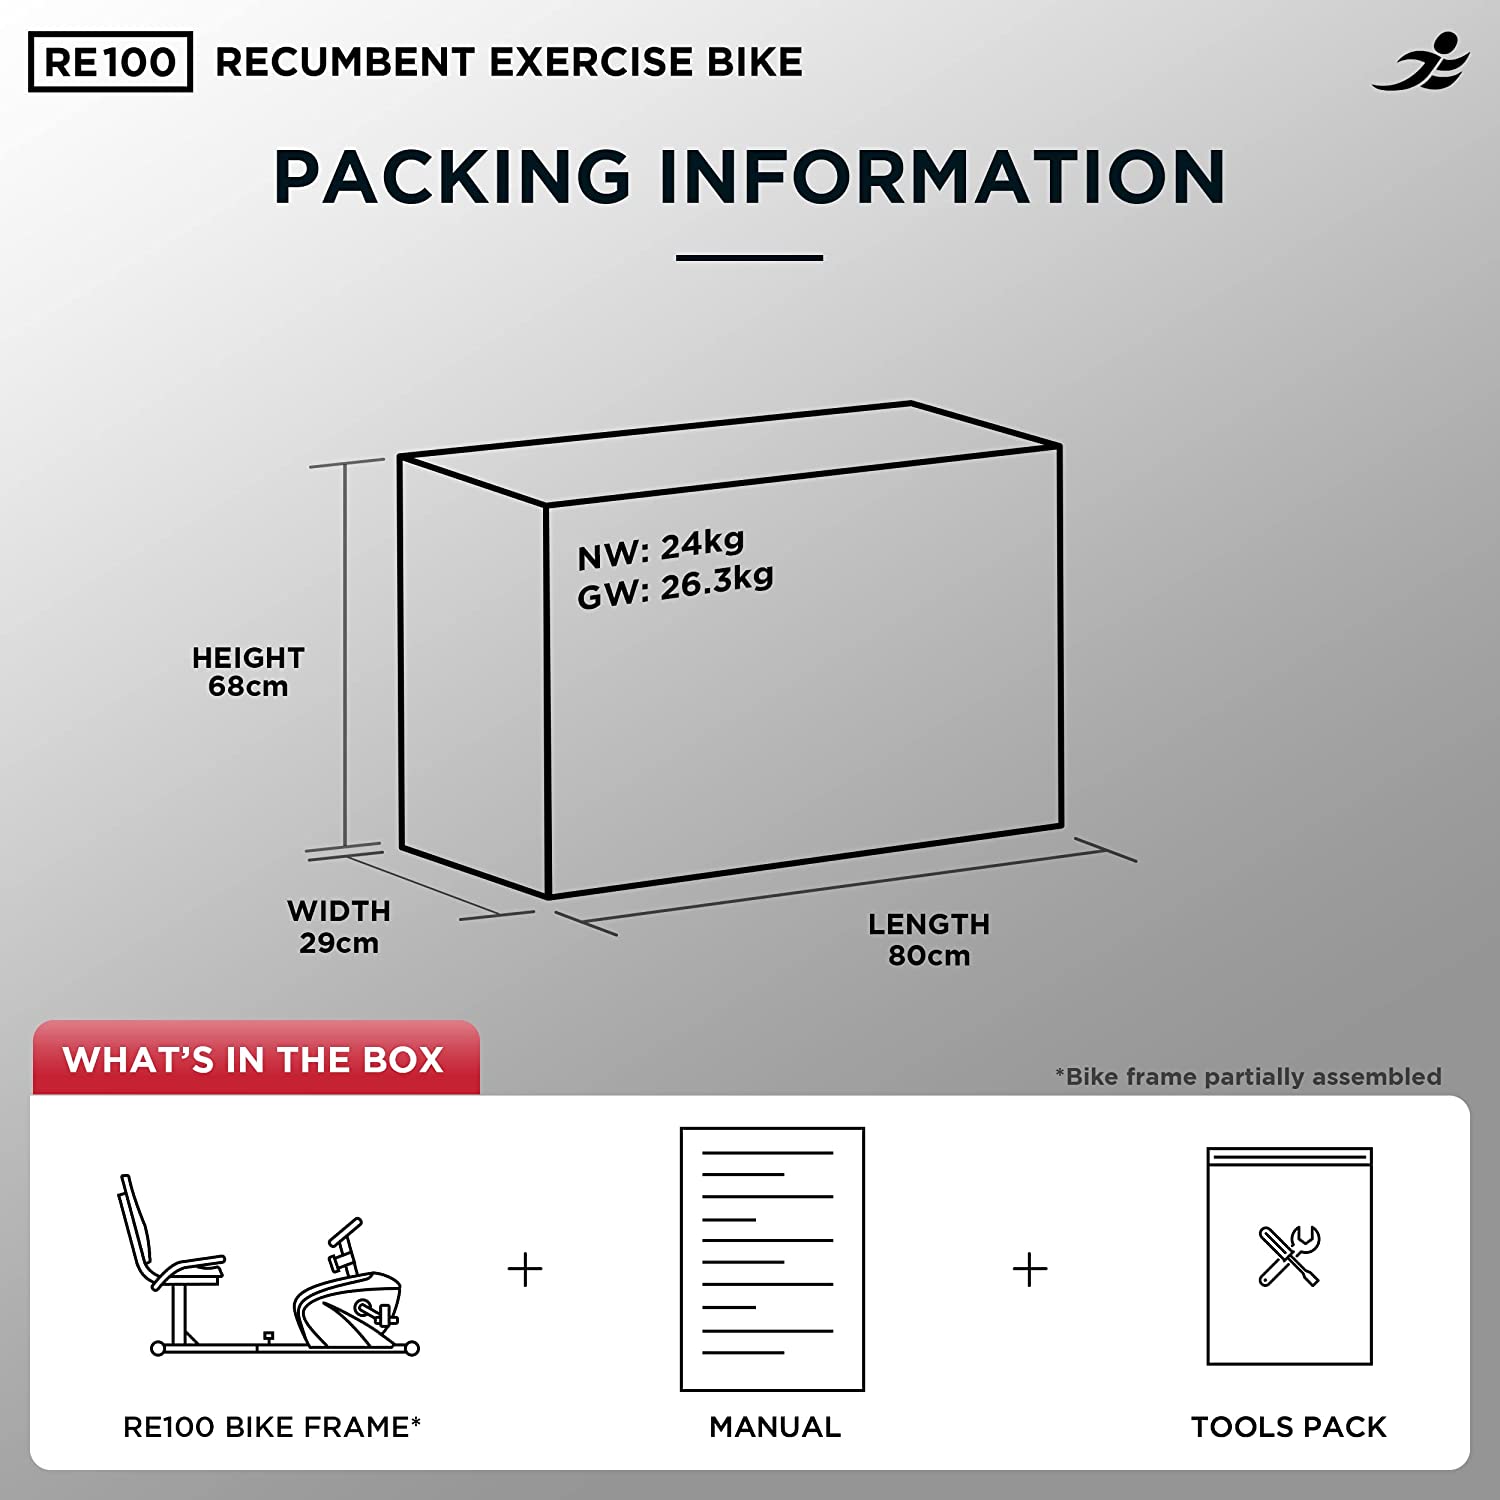 JLL RE100 Recumbent Home Exercise Bike Packaging Information